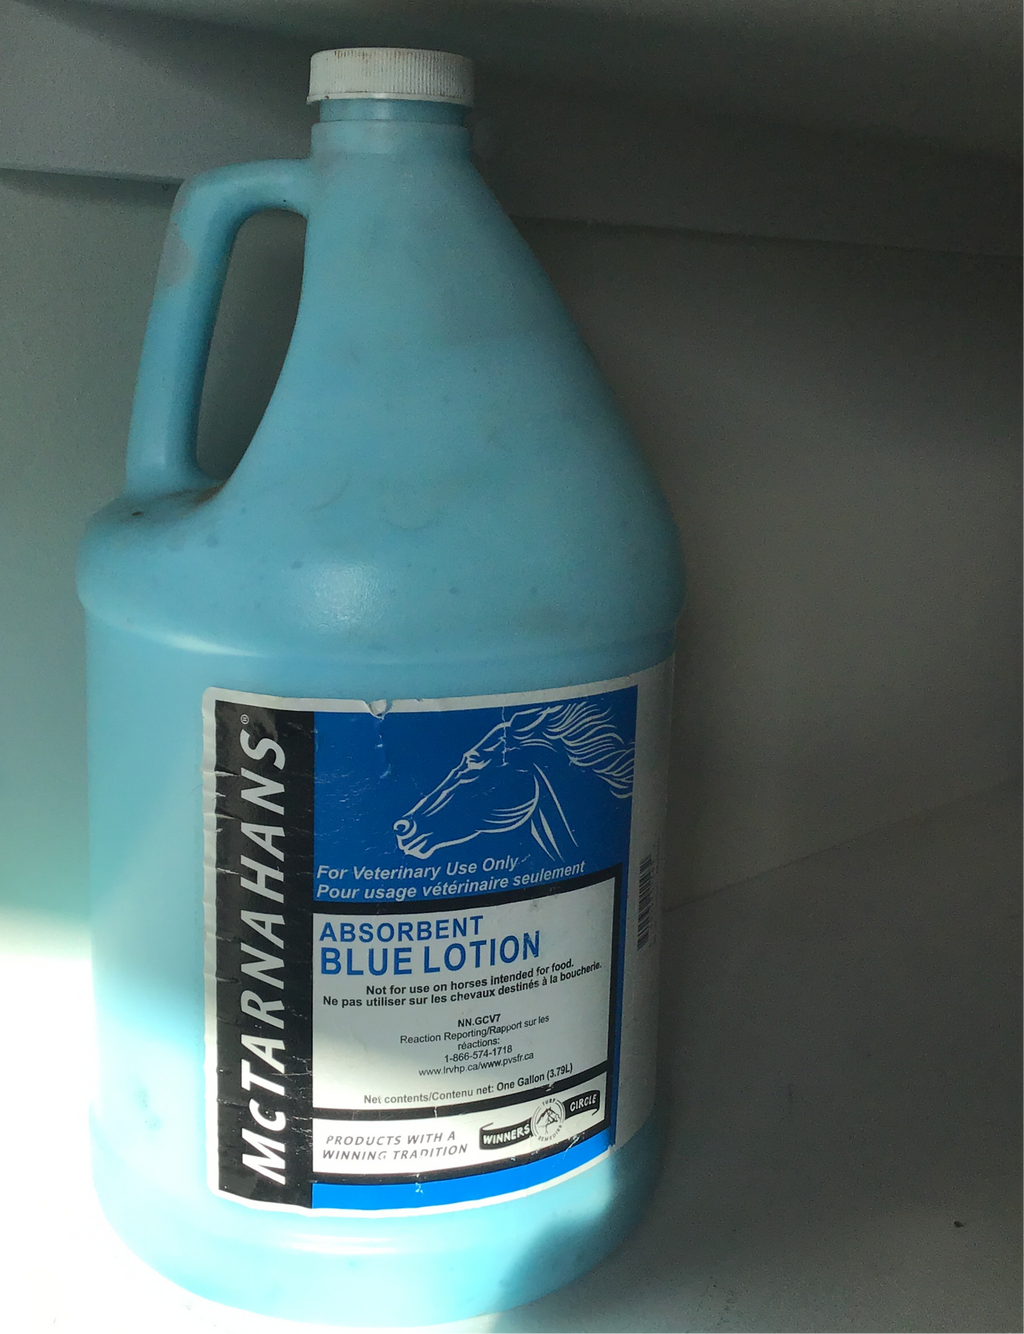 McTarnahans blue lotion